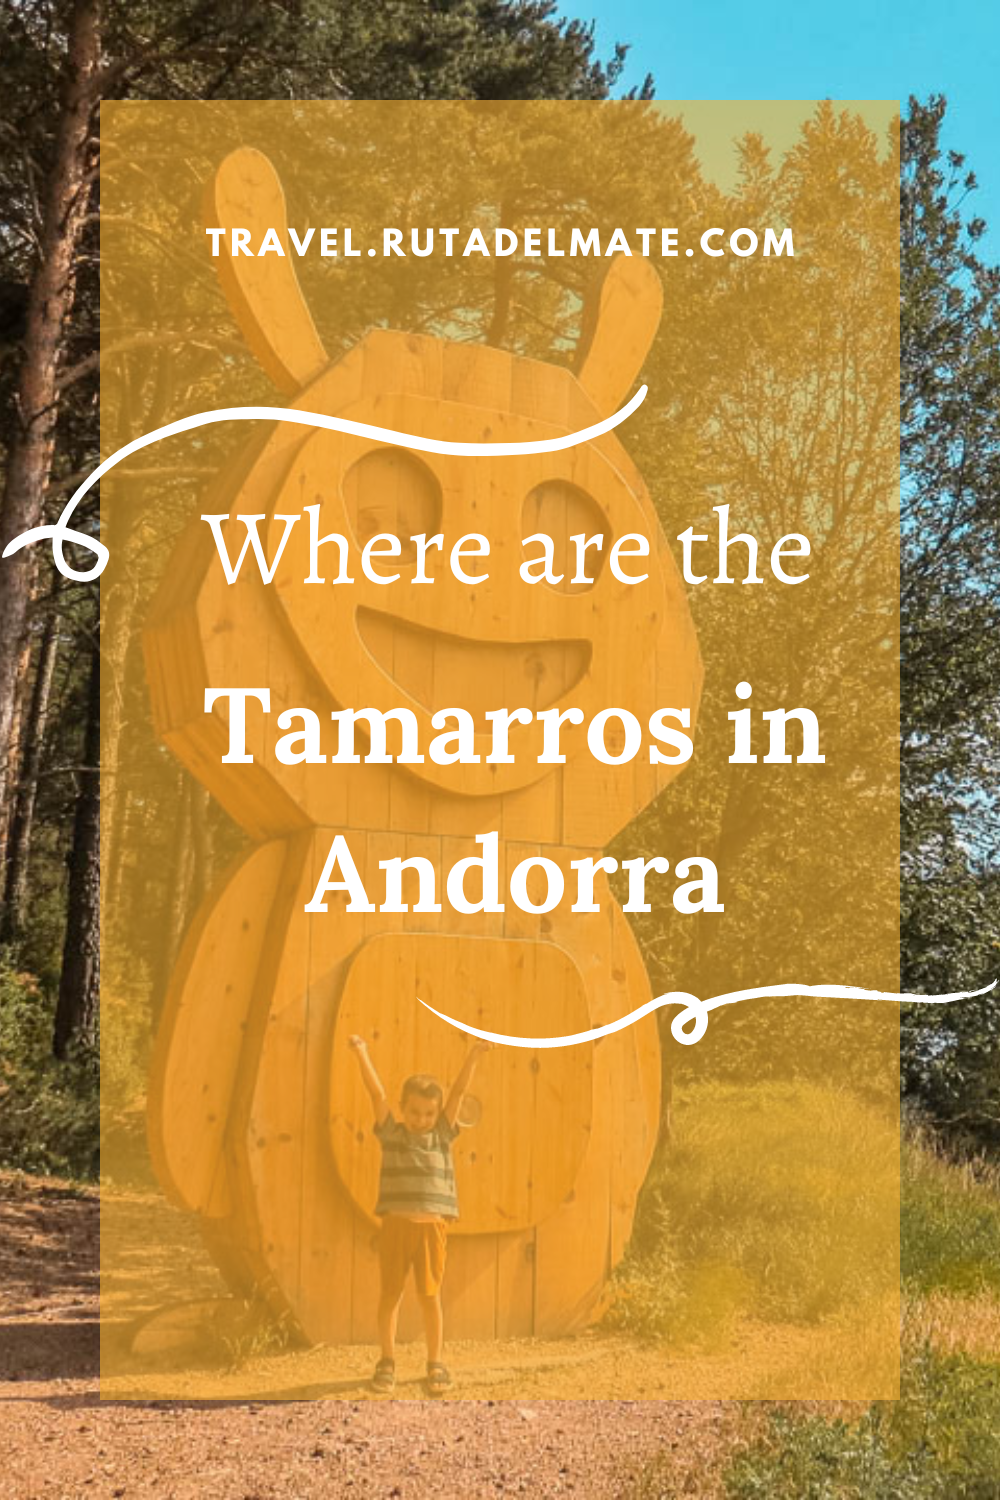 Where are the tamarros in Andorra